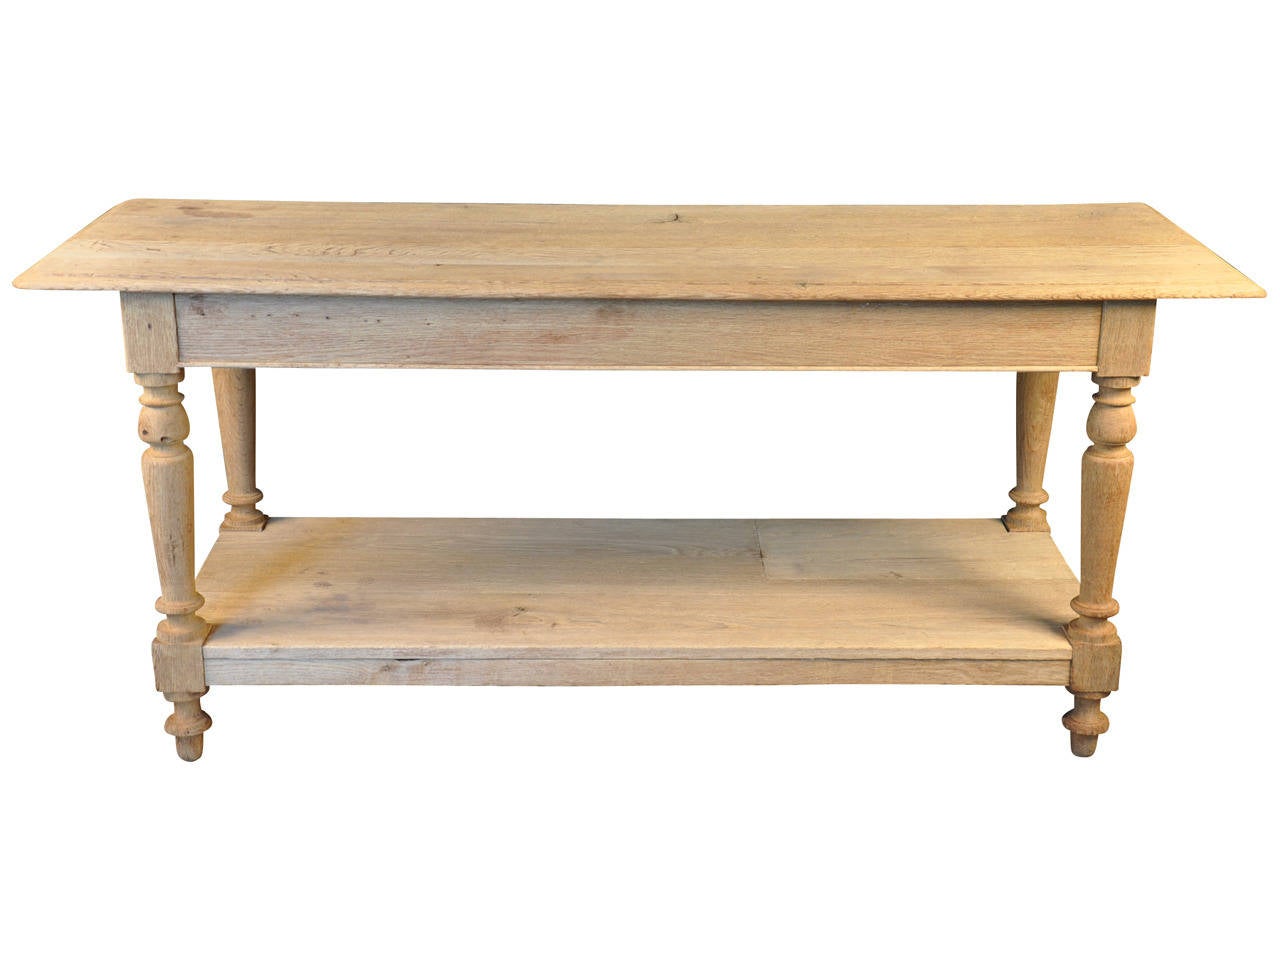 A French late 19th century Draper Table - Work table - in washed oak.  This charming Louis Philippe style piece is very versatile.  Wonderful as a console, sideboard or kitchen island.